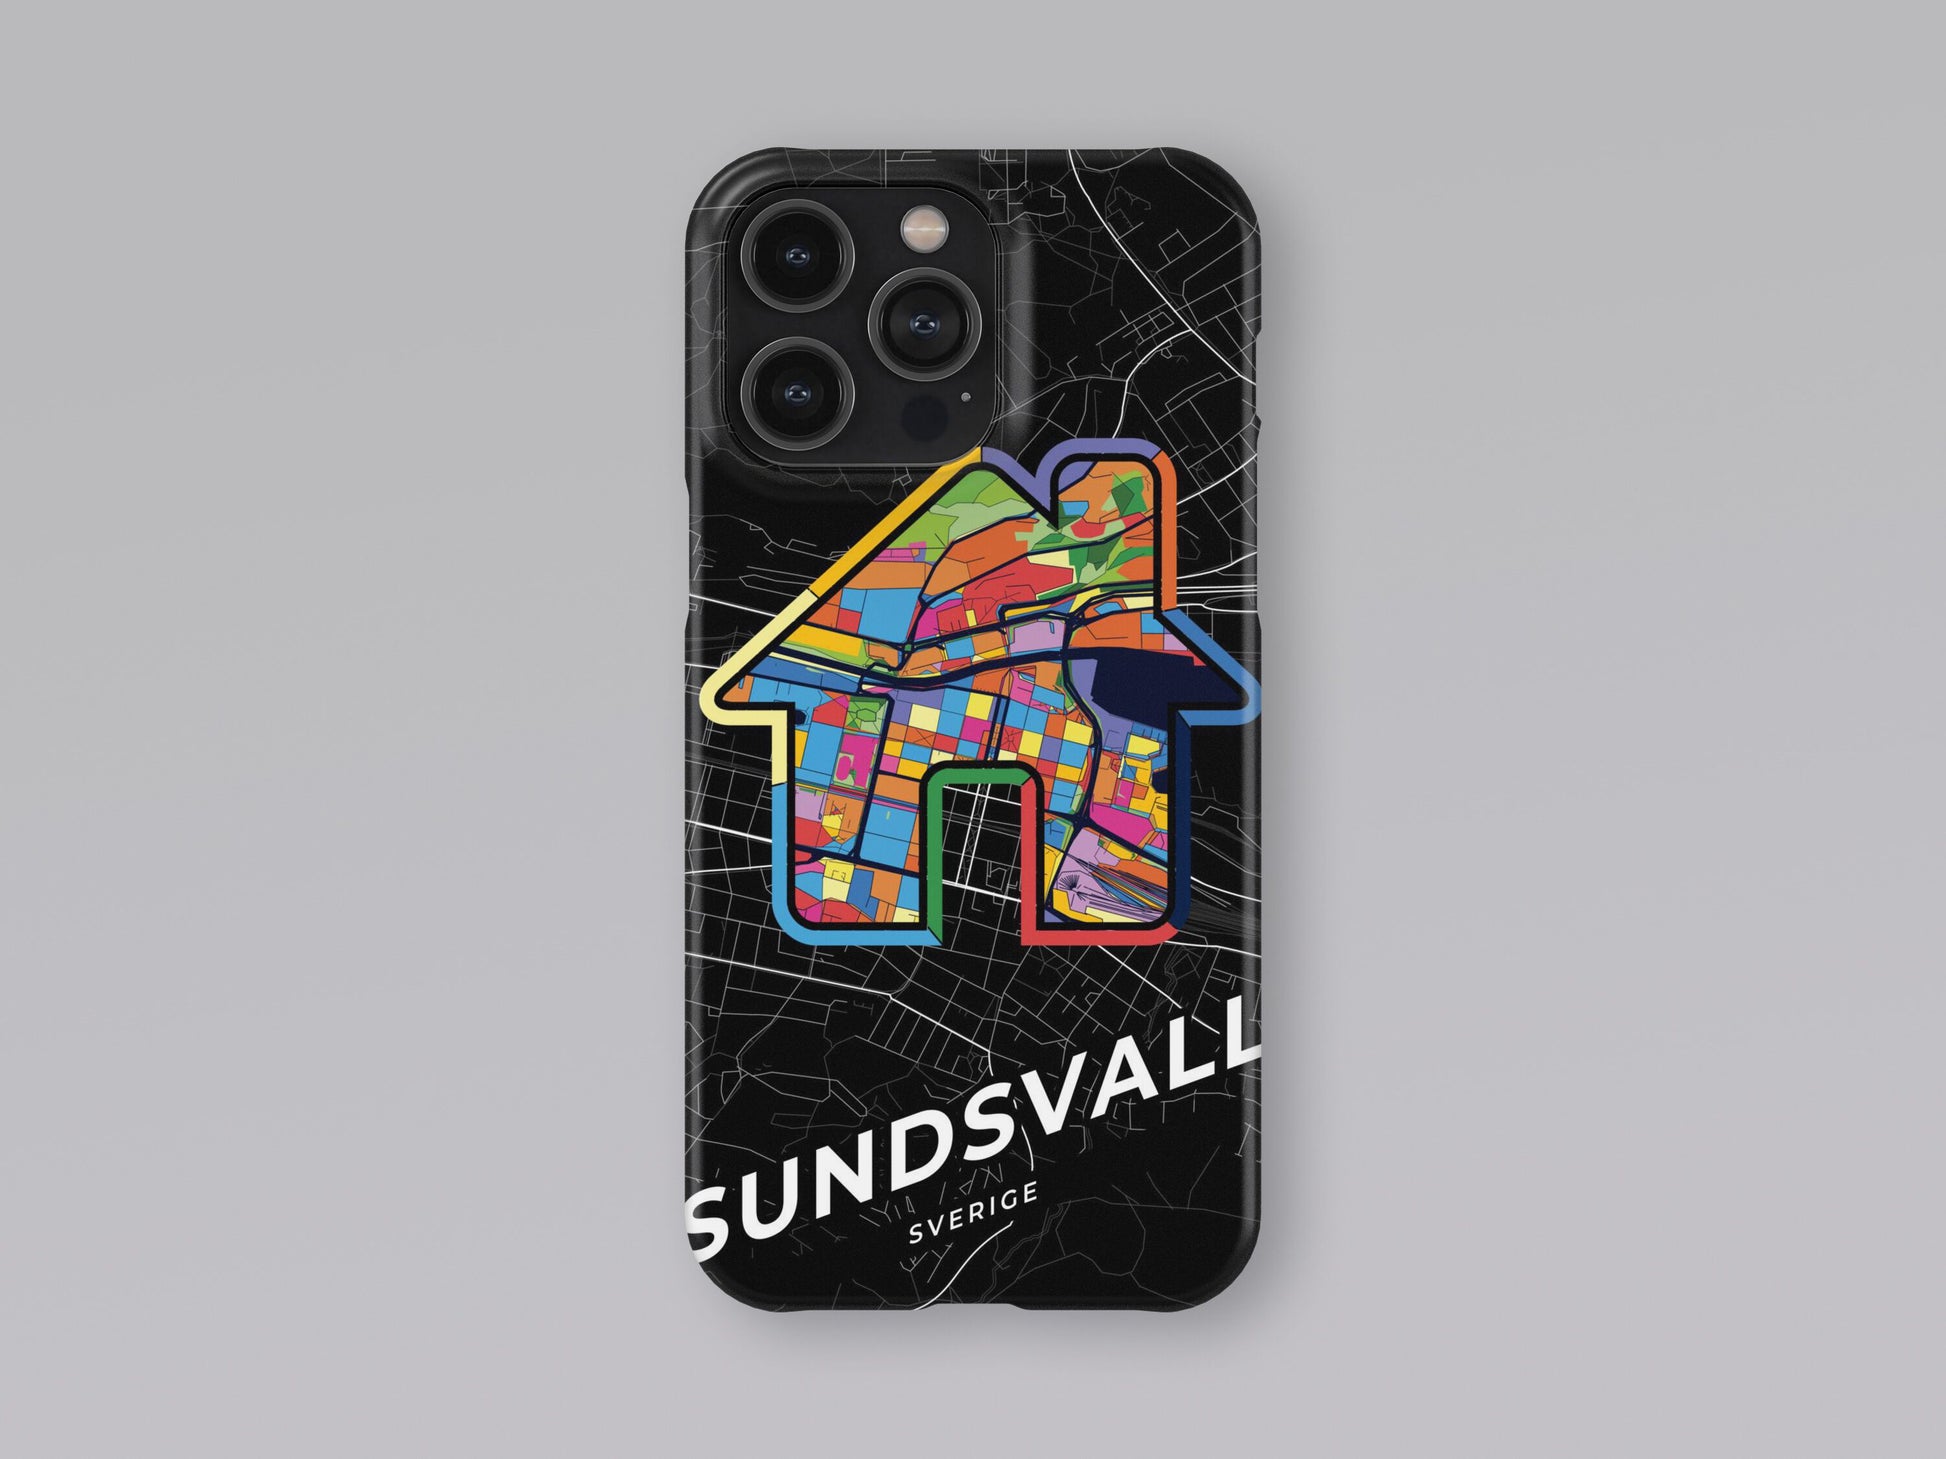 Sundsvall Sweden slim phone case with colorful icon 3